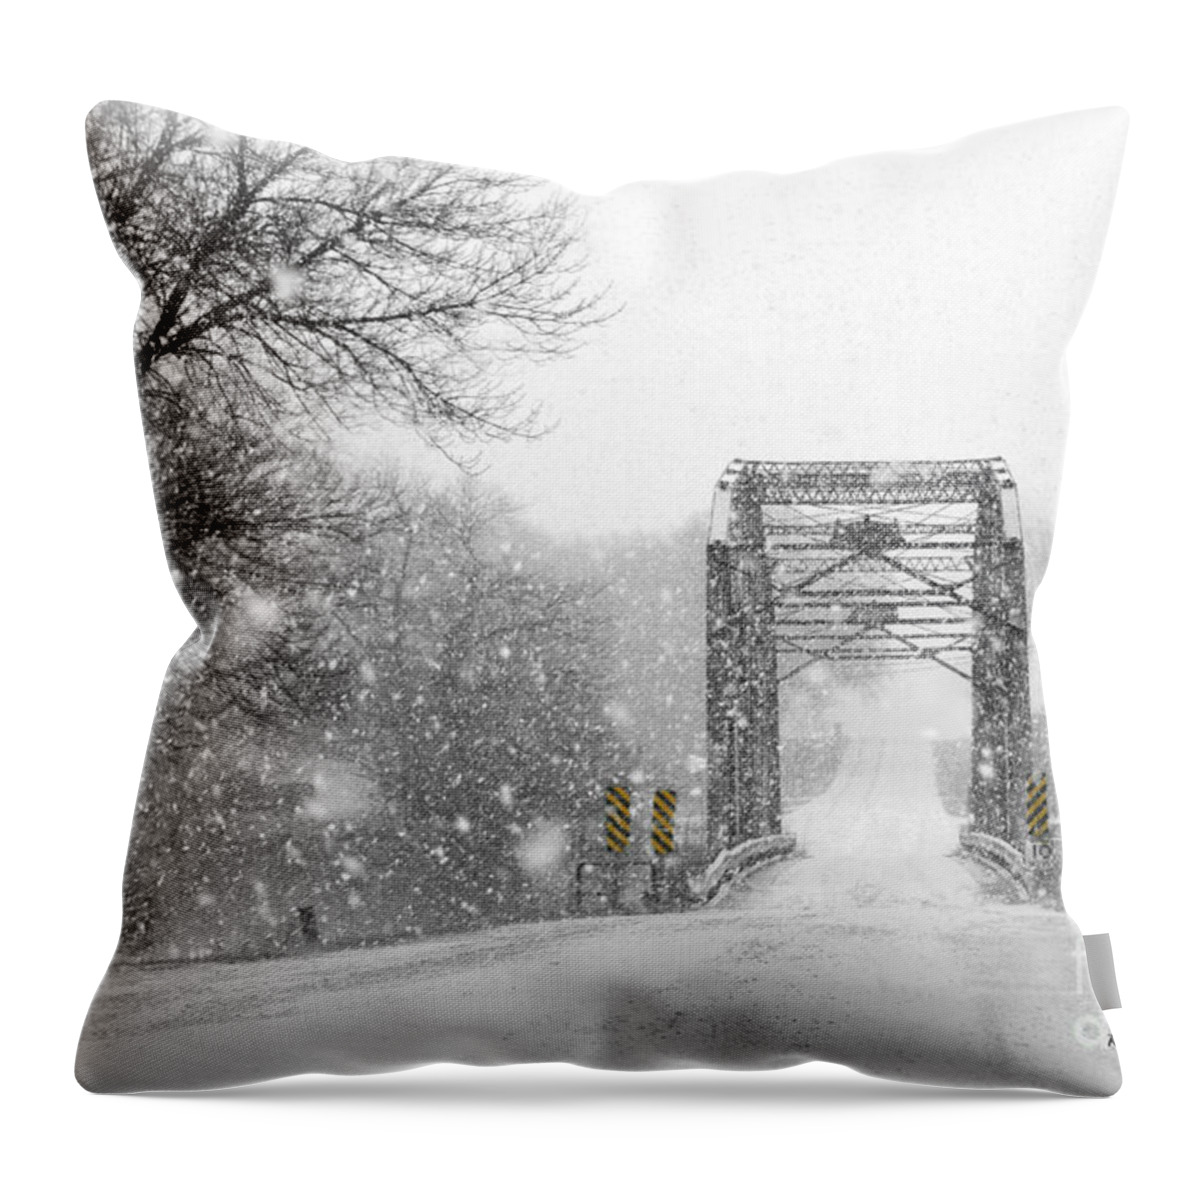 Snowy Day And One Lane Bridge Throw Pillow featuring the photograph Snowy Day And One Lane Bridge by Kathy M Krause